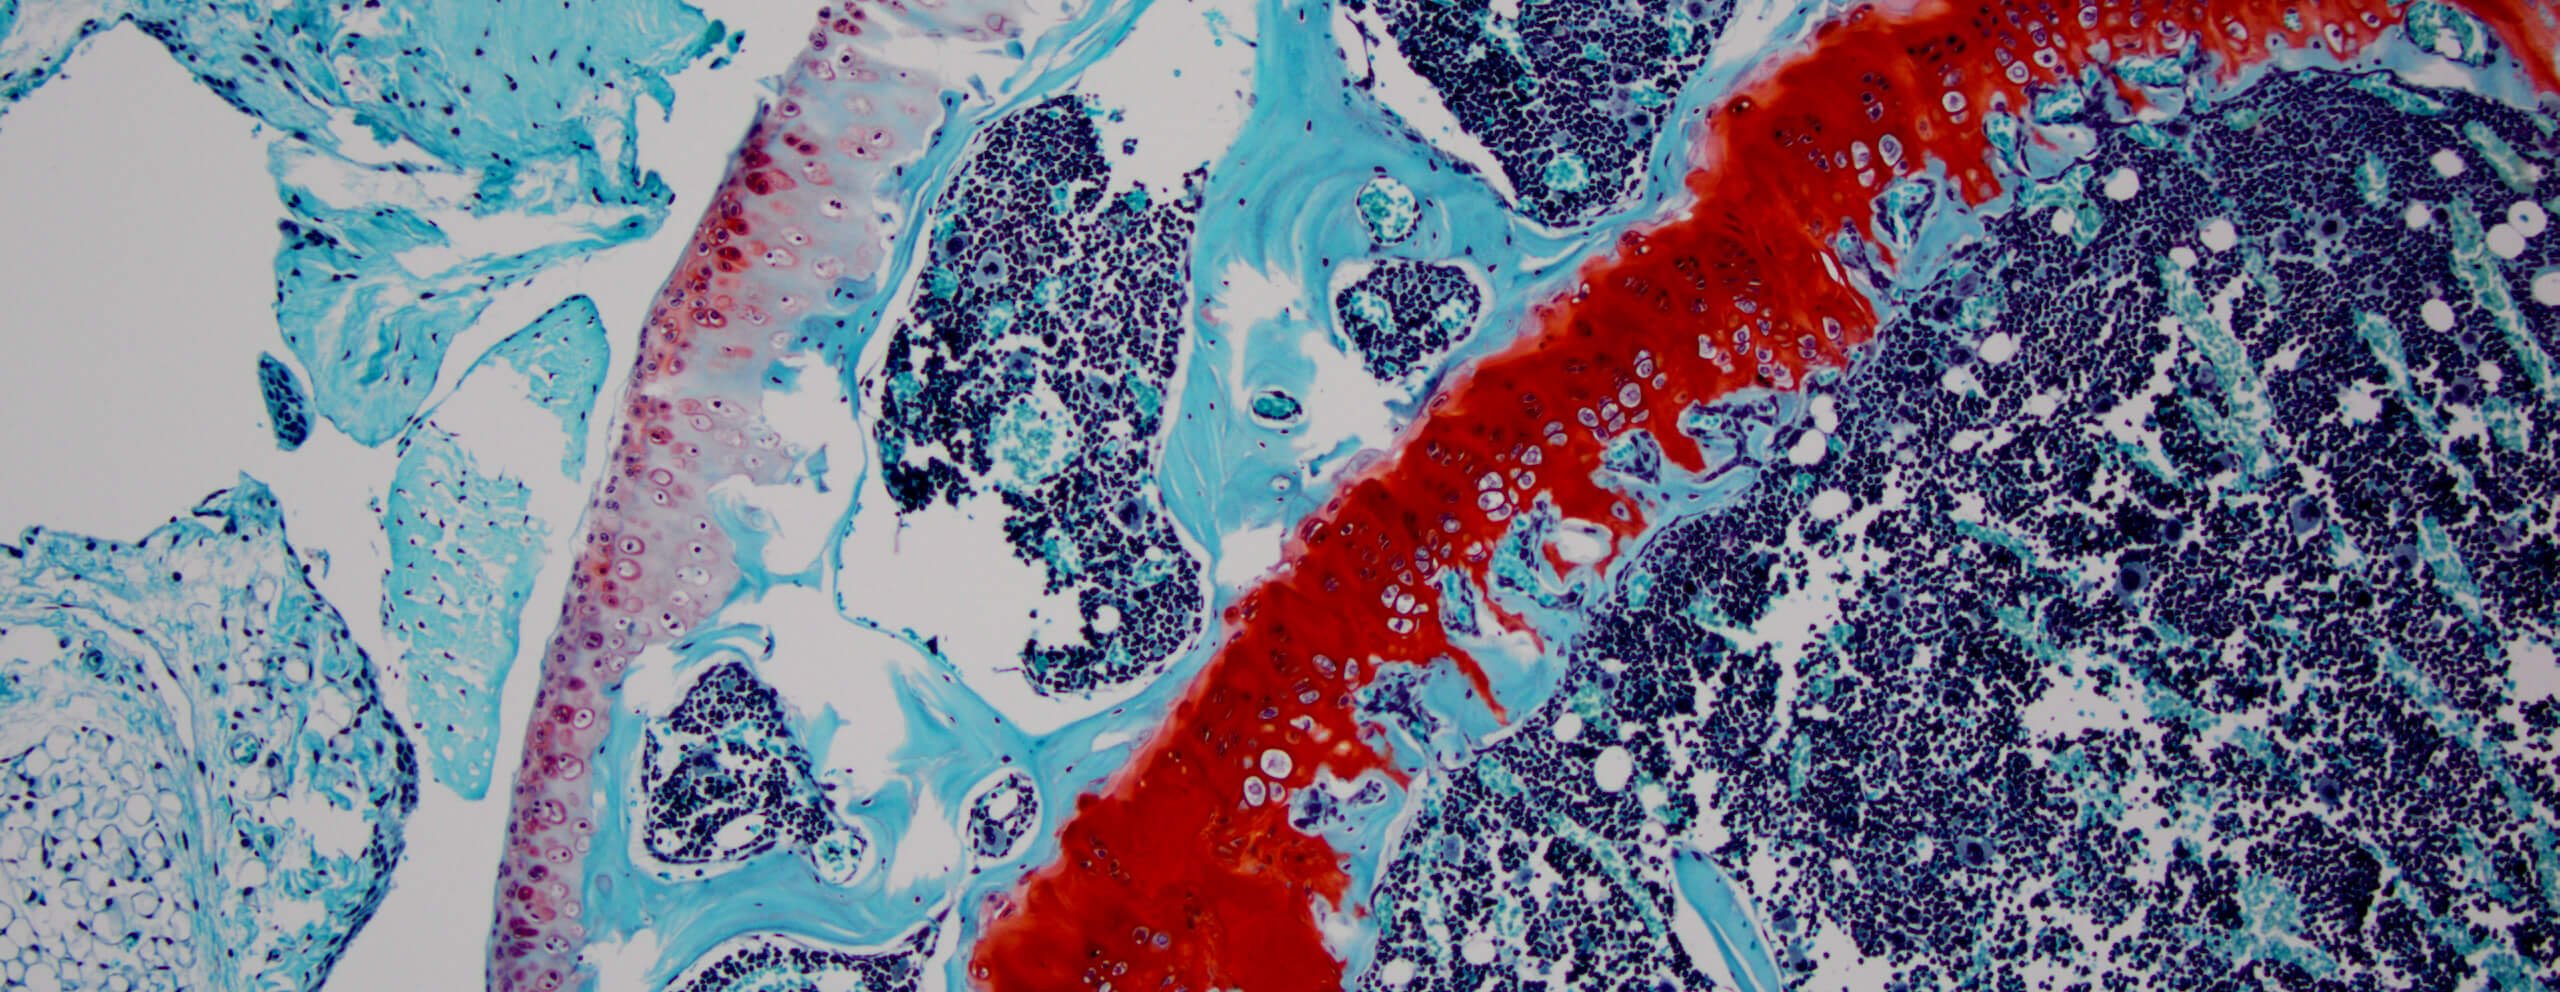 Histology image showing stained bone tissue: streaks of red through blue and cyan blobs